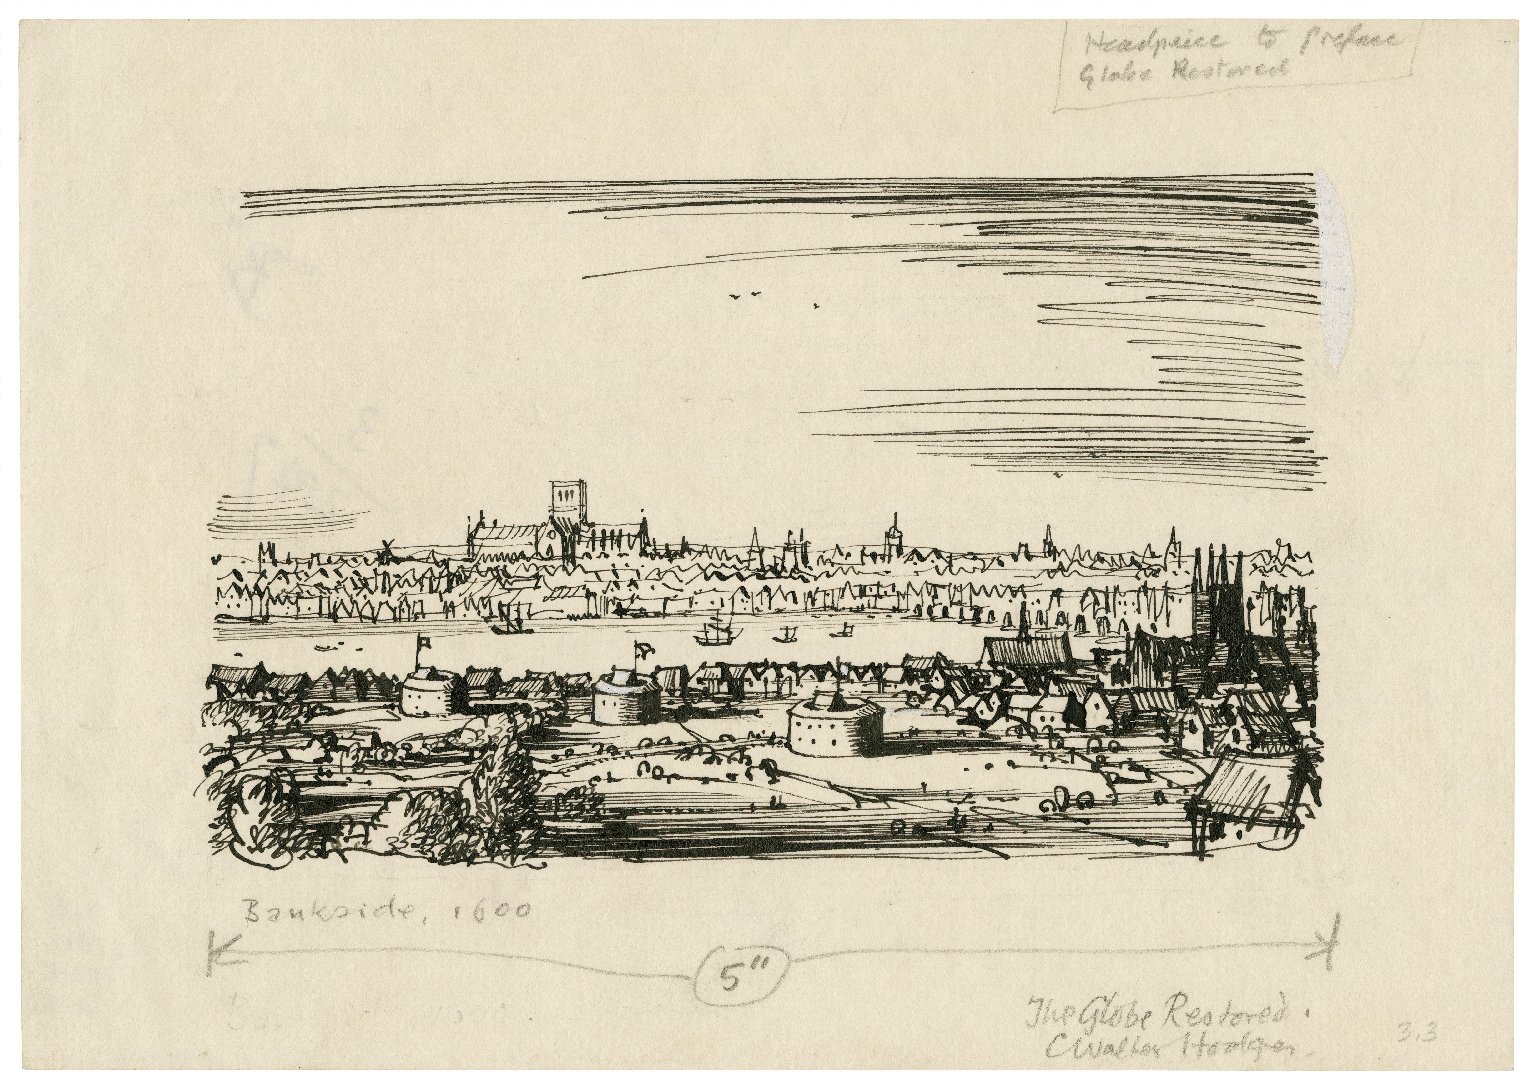 Conjectural view of Bankside by C. Walter Hodges. Image courtesy of the Folger Digital Image Collection.